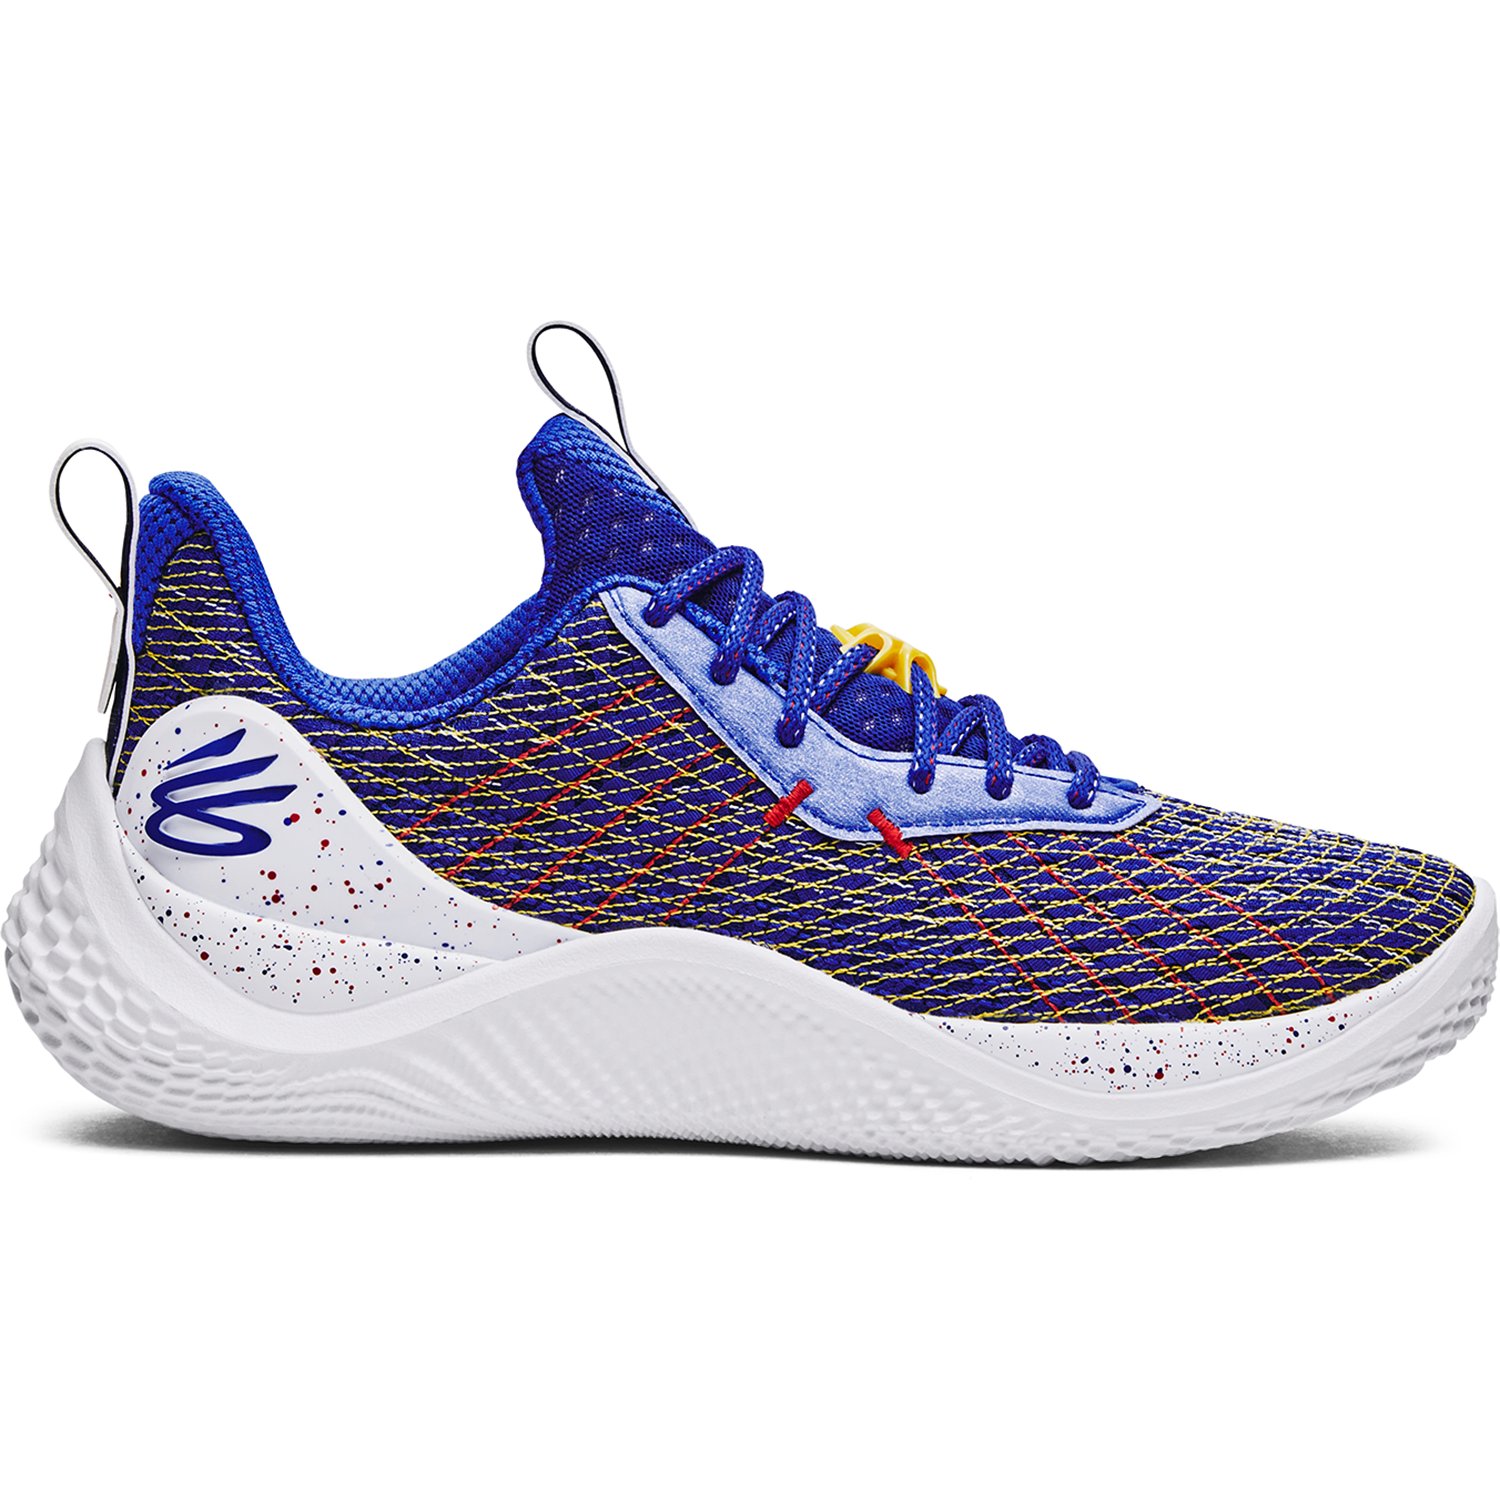 Curry Flow 10 'Curry-fornia' Shoes | Under Armour